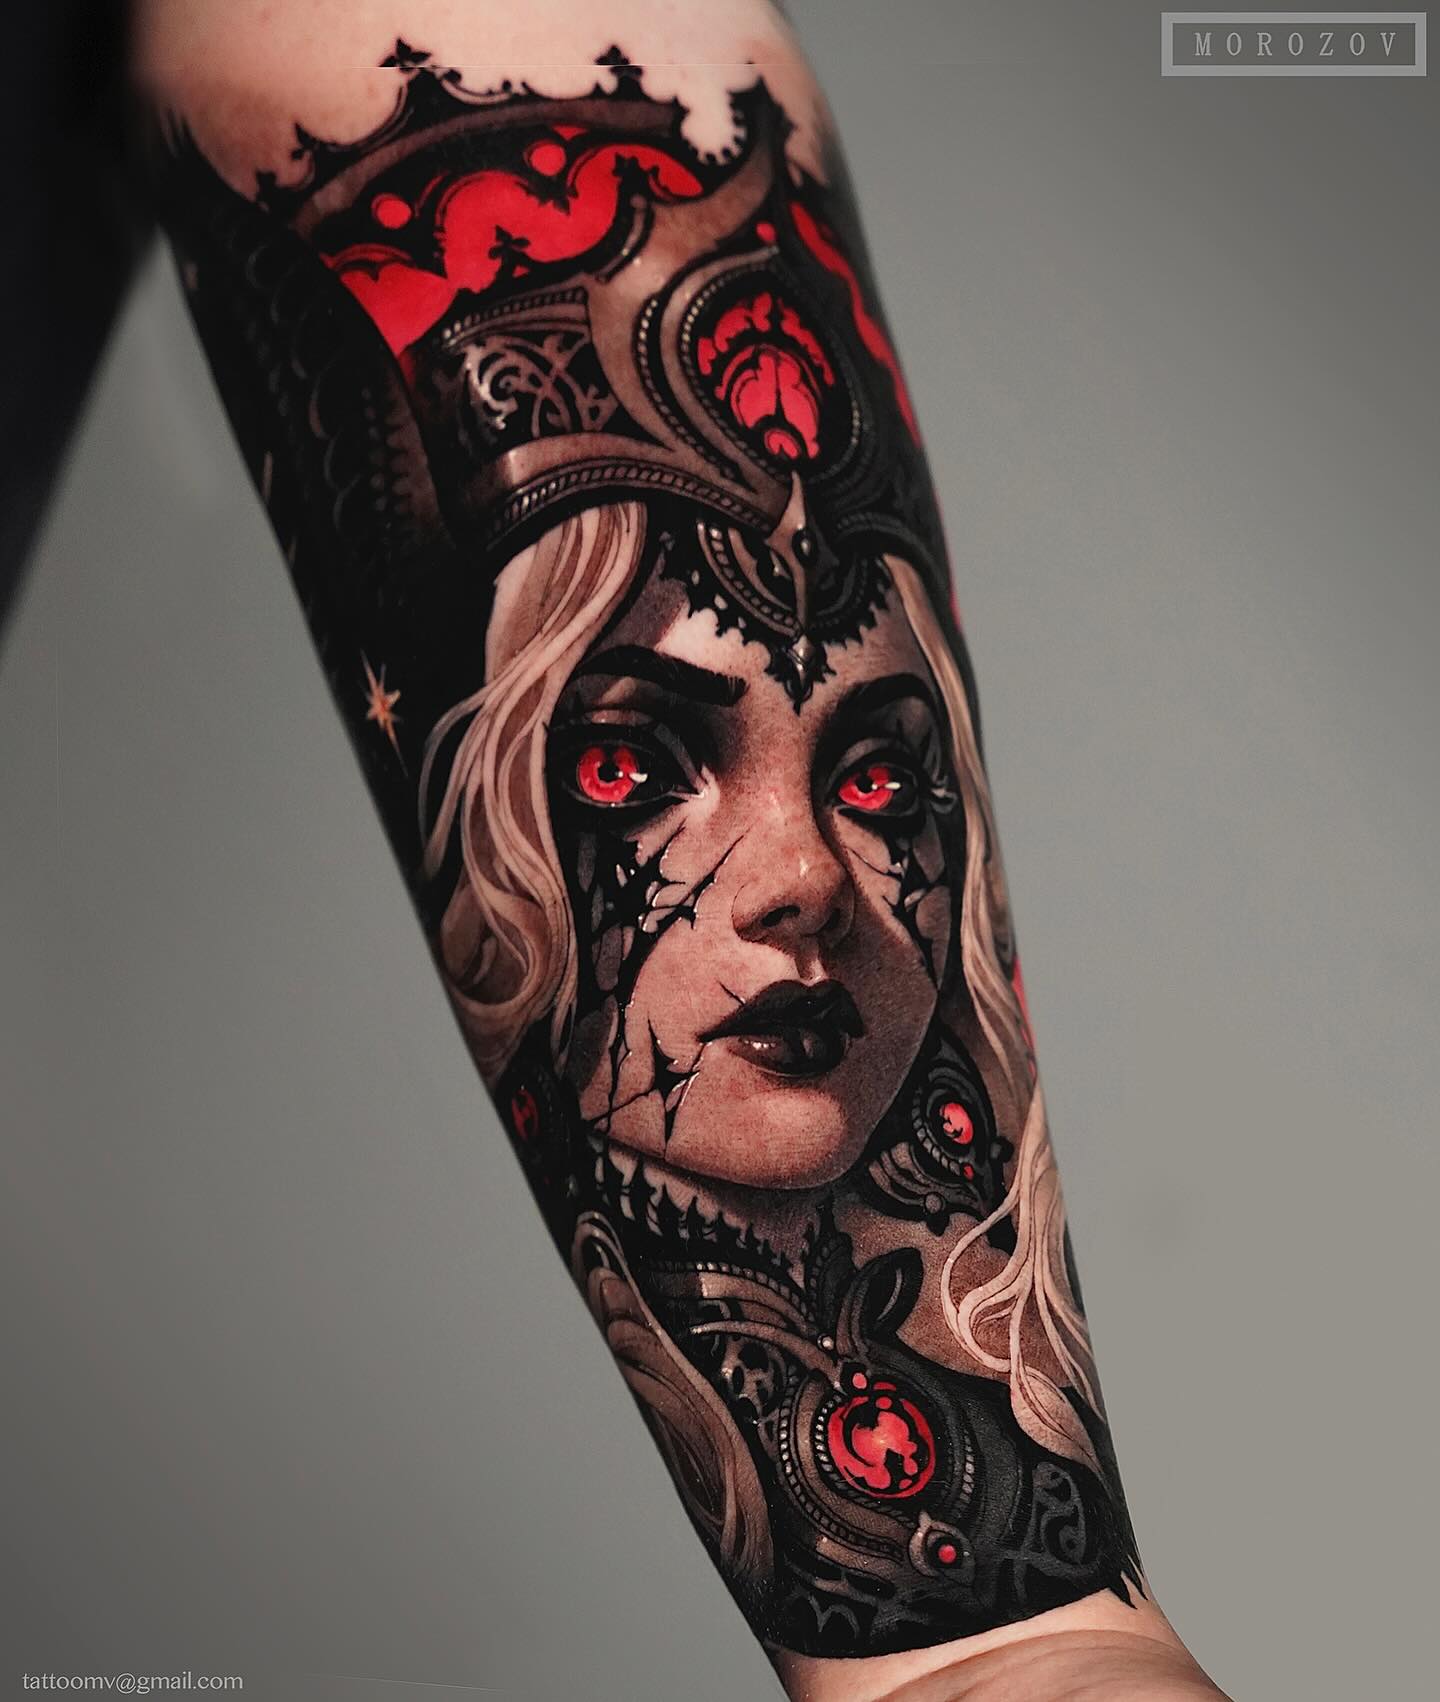 3D tattoo on forearm by mvtattoo